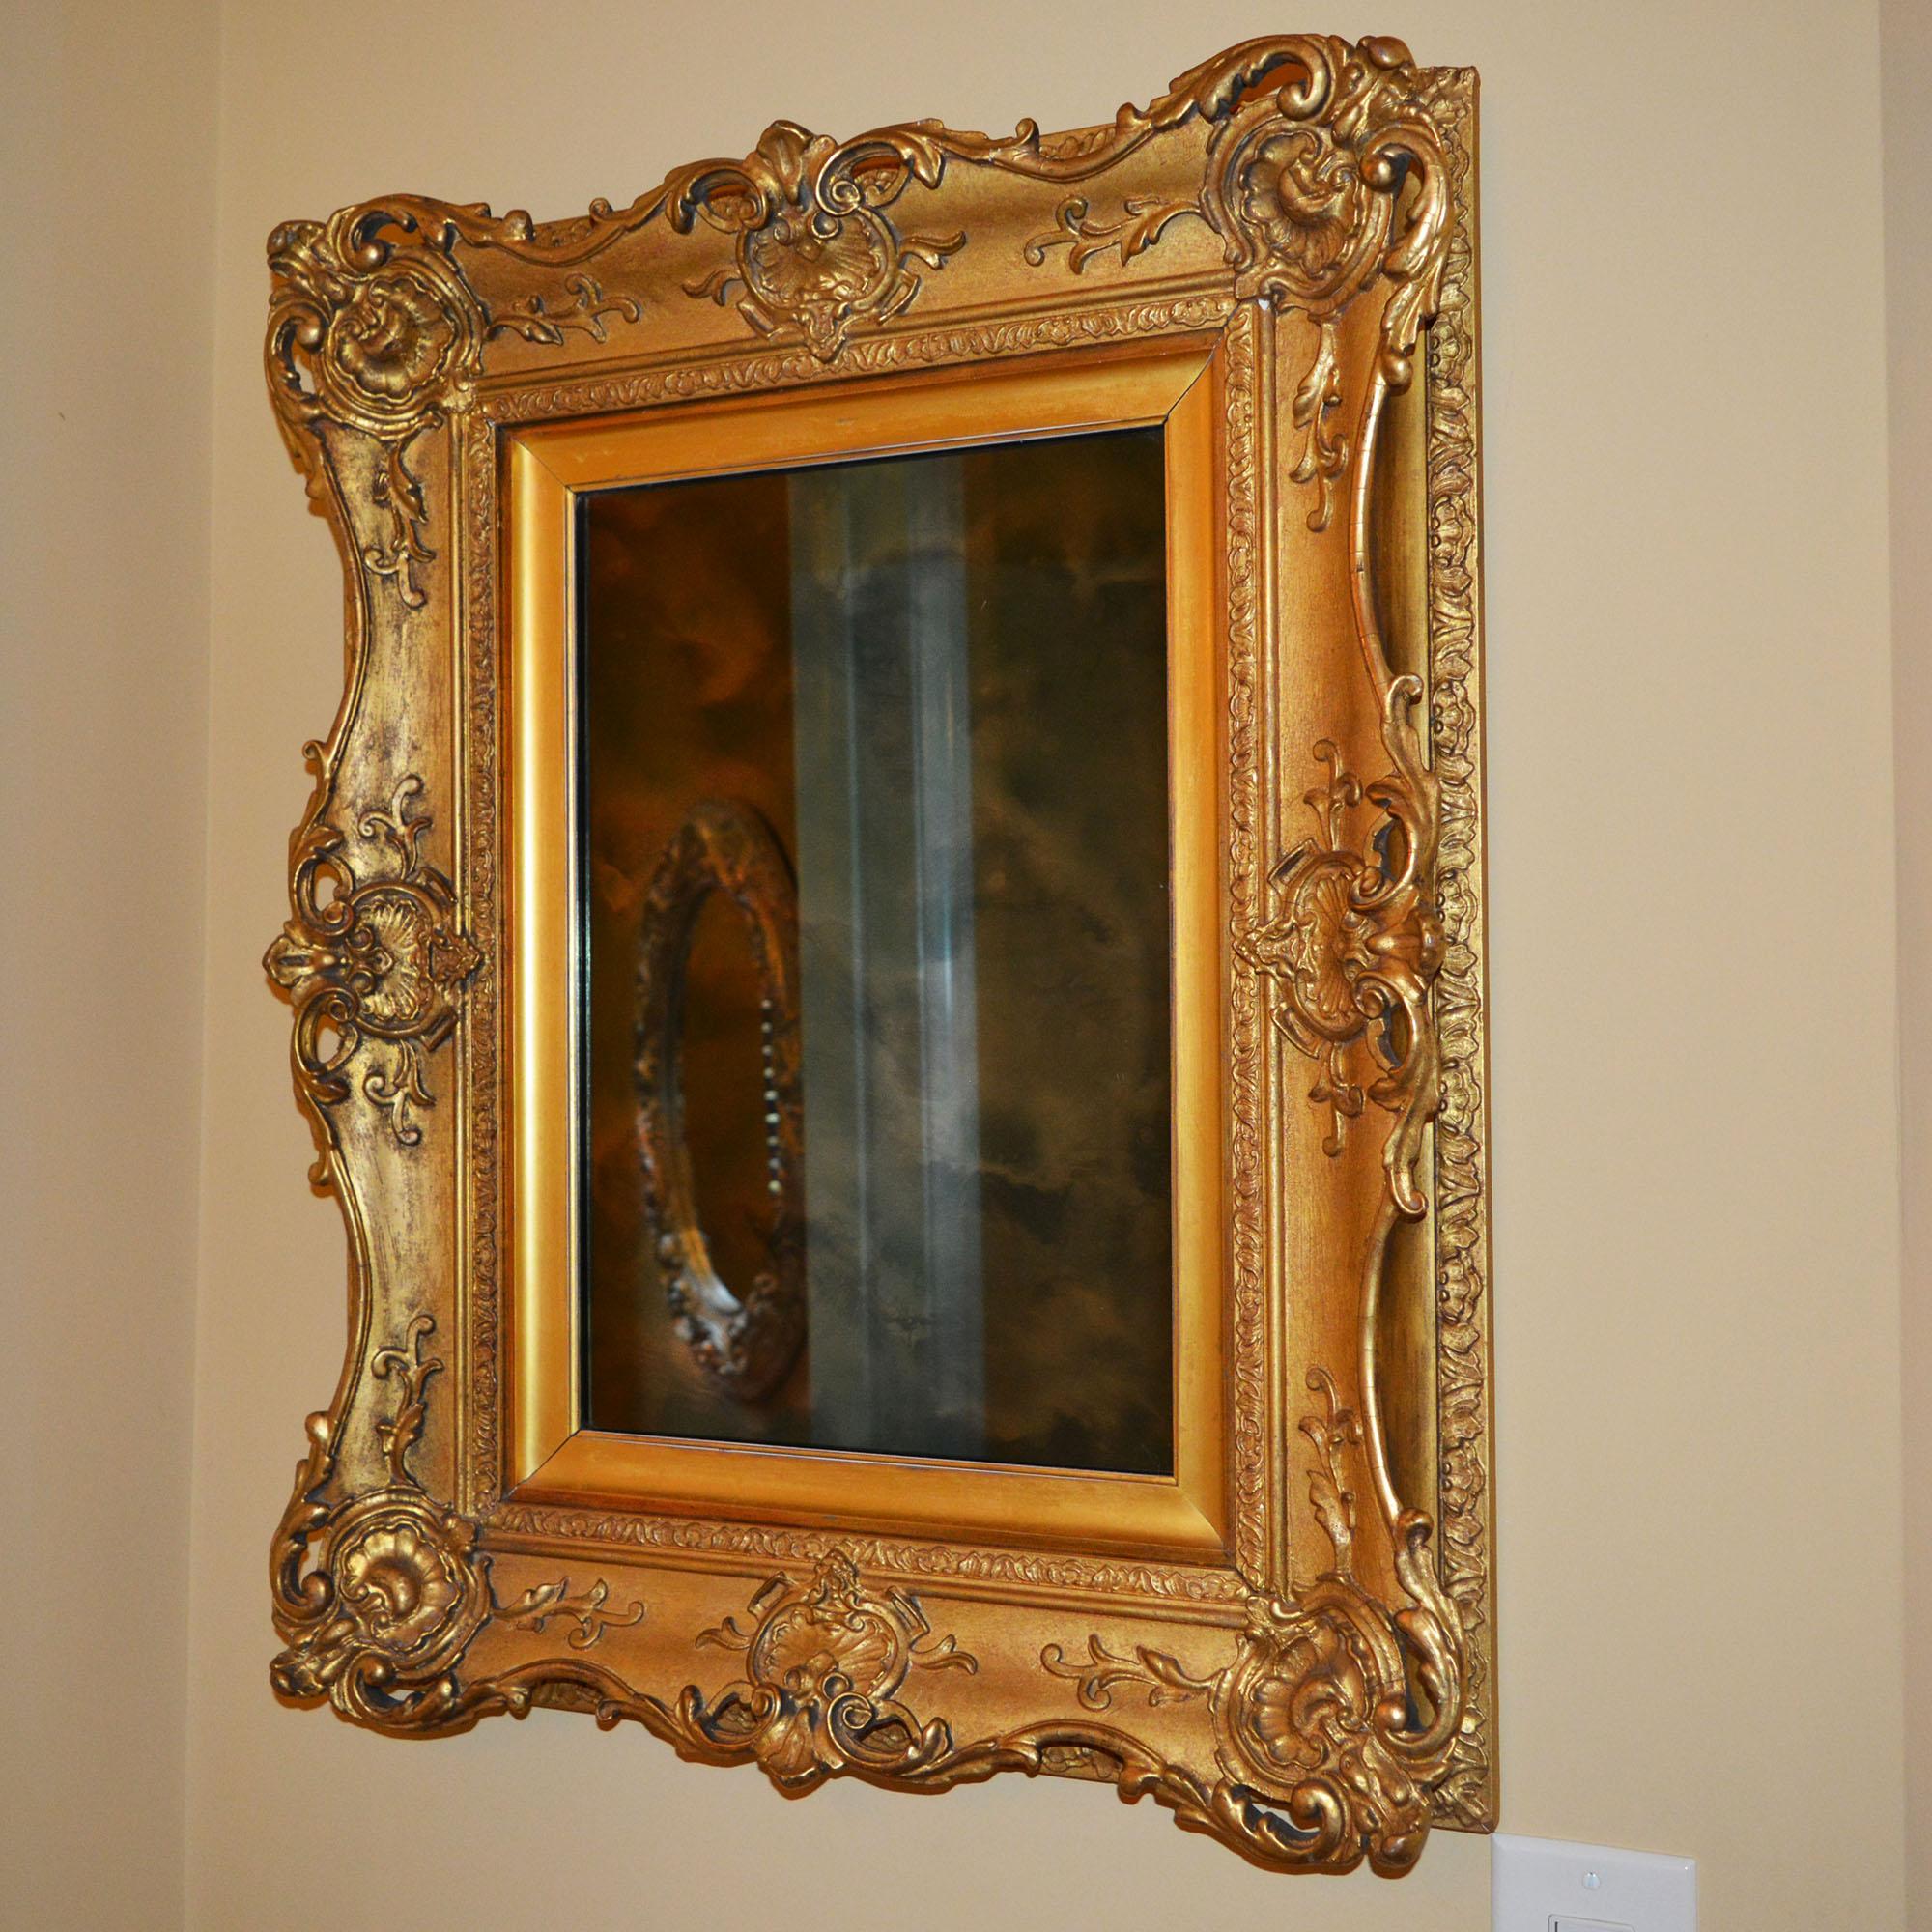 This is an antique wall mirror has painted gilt gesso frame has a beautiful ghosted effect across the mirror. The impressive frame is in wonderful shape. The work of Daniel Miller as the carver and gilder is documented on the back. Daniel Miller